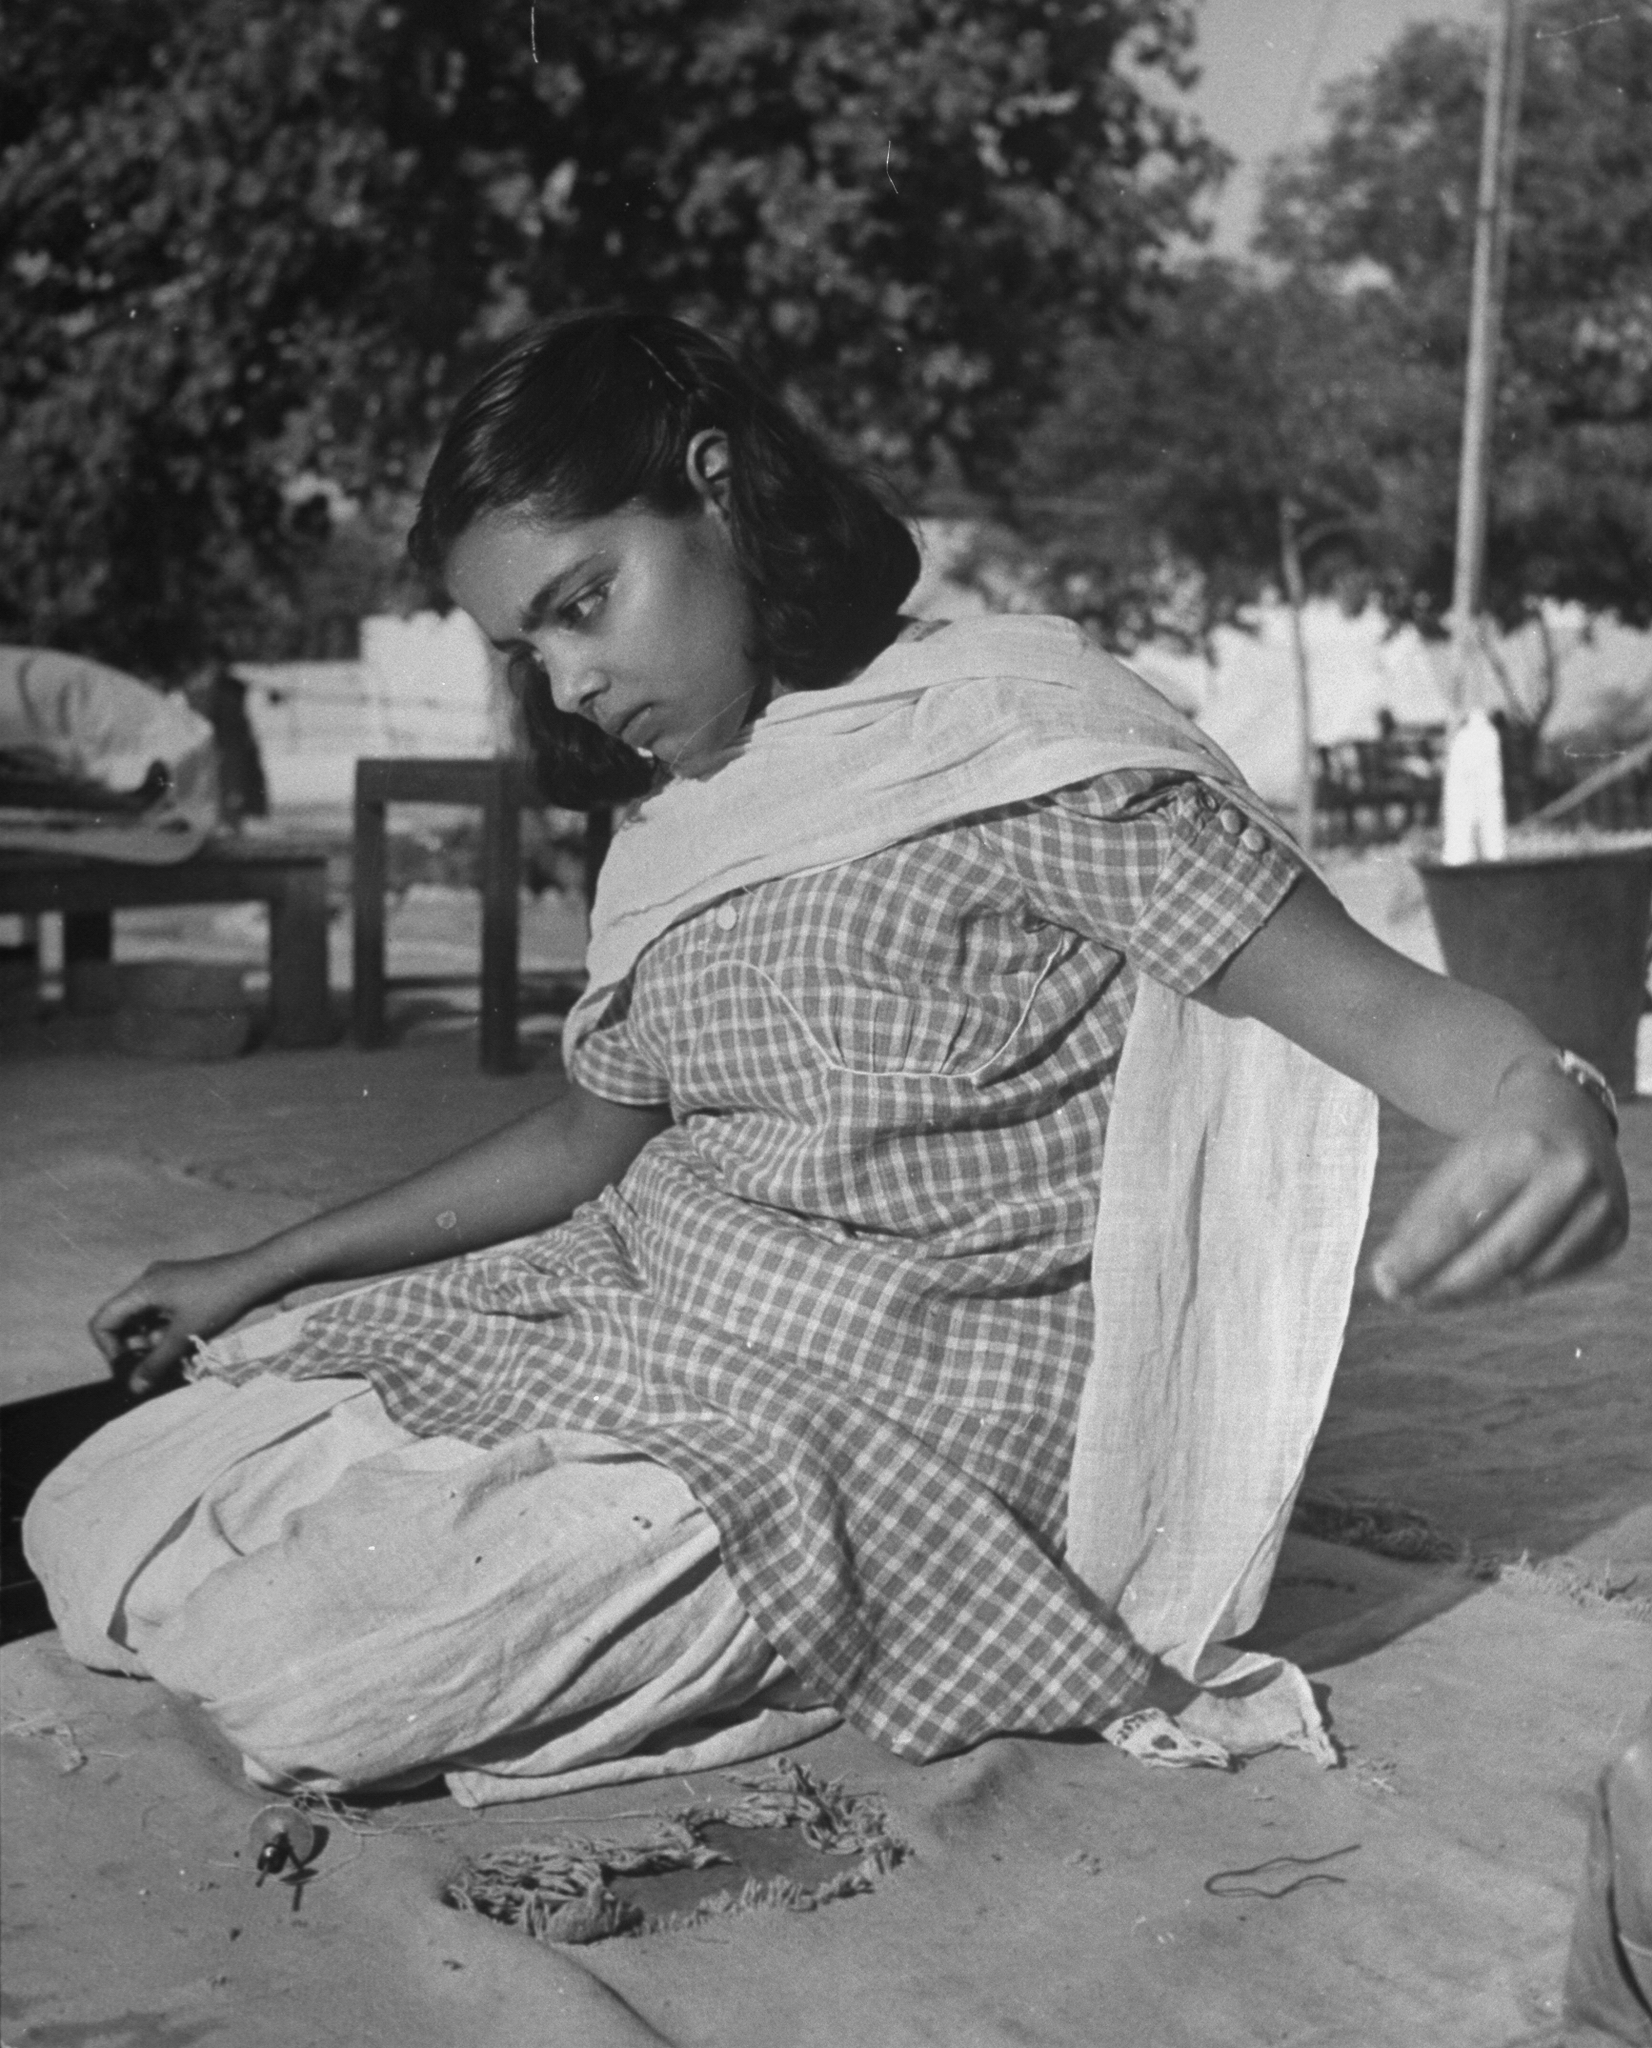 Sita Gandhi, a granddaughter of Gandhi, is seen at the Gandhi Colony compound in 1946.